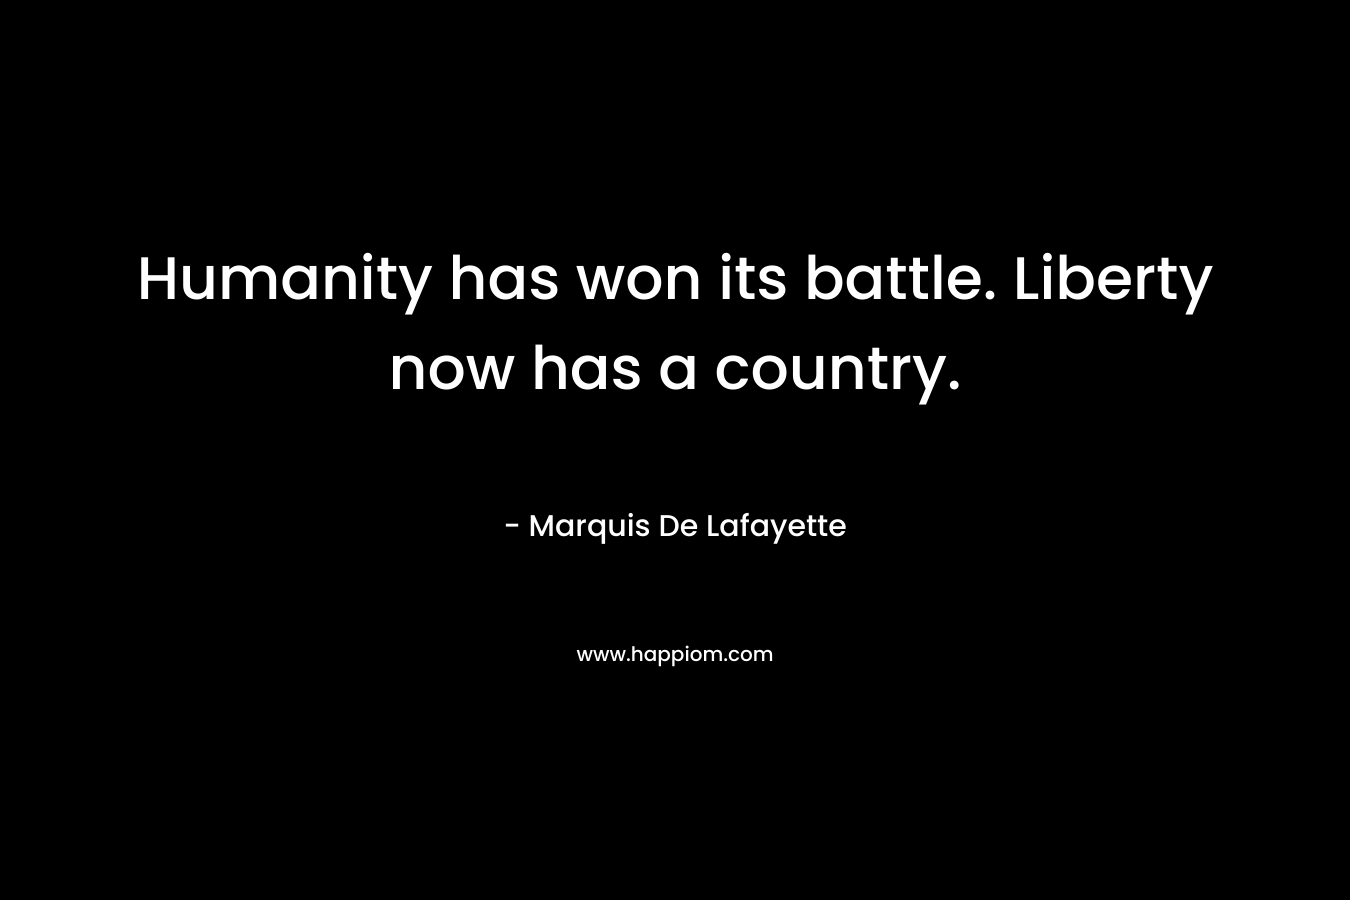 Humanity has won its battle. Liberty now has a country.